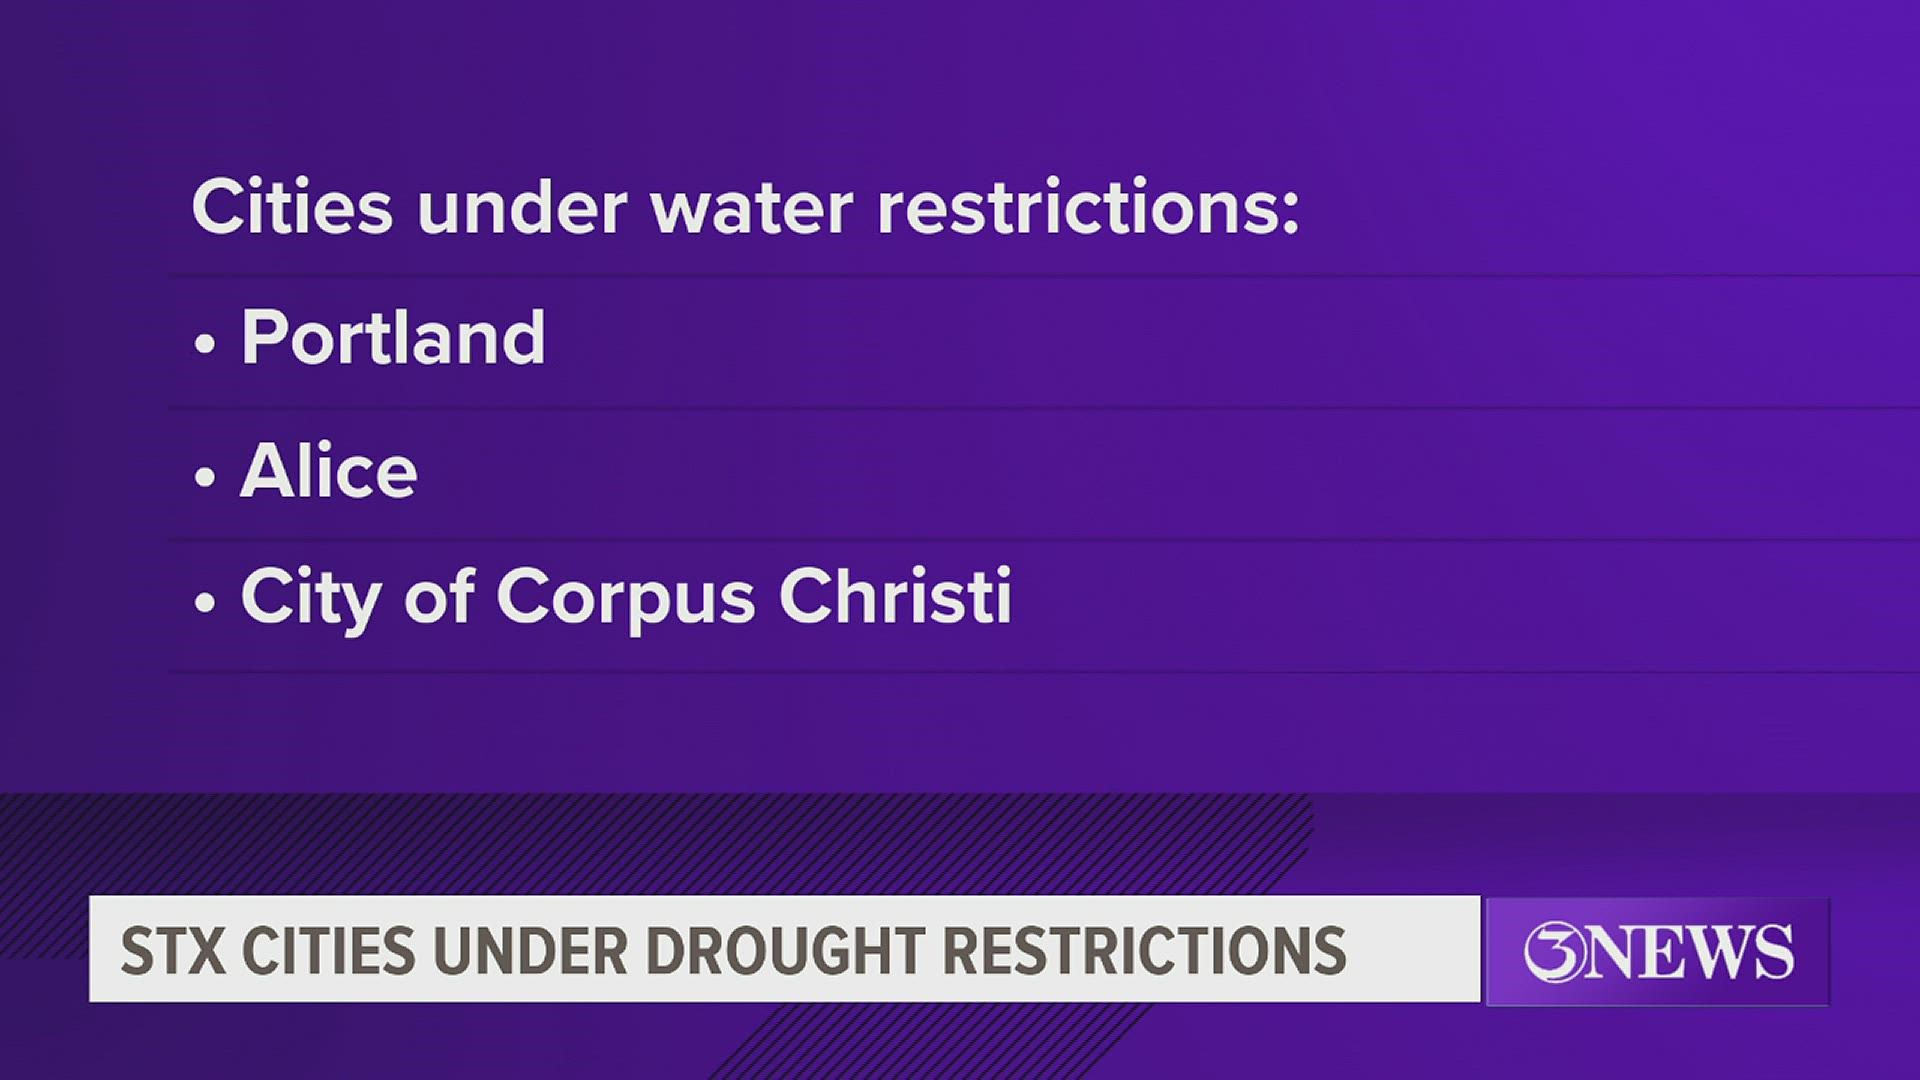 Due to continuous hot temperatures and dry conditions, several South Texas cities have began asking residents to conserve water.